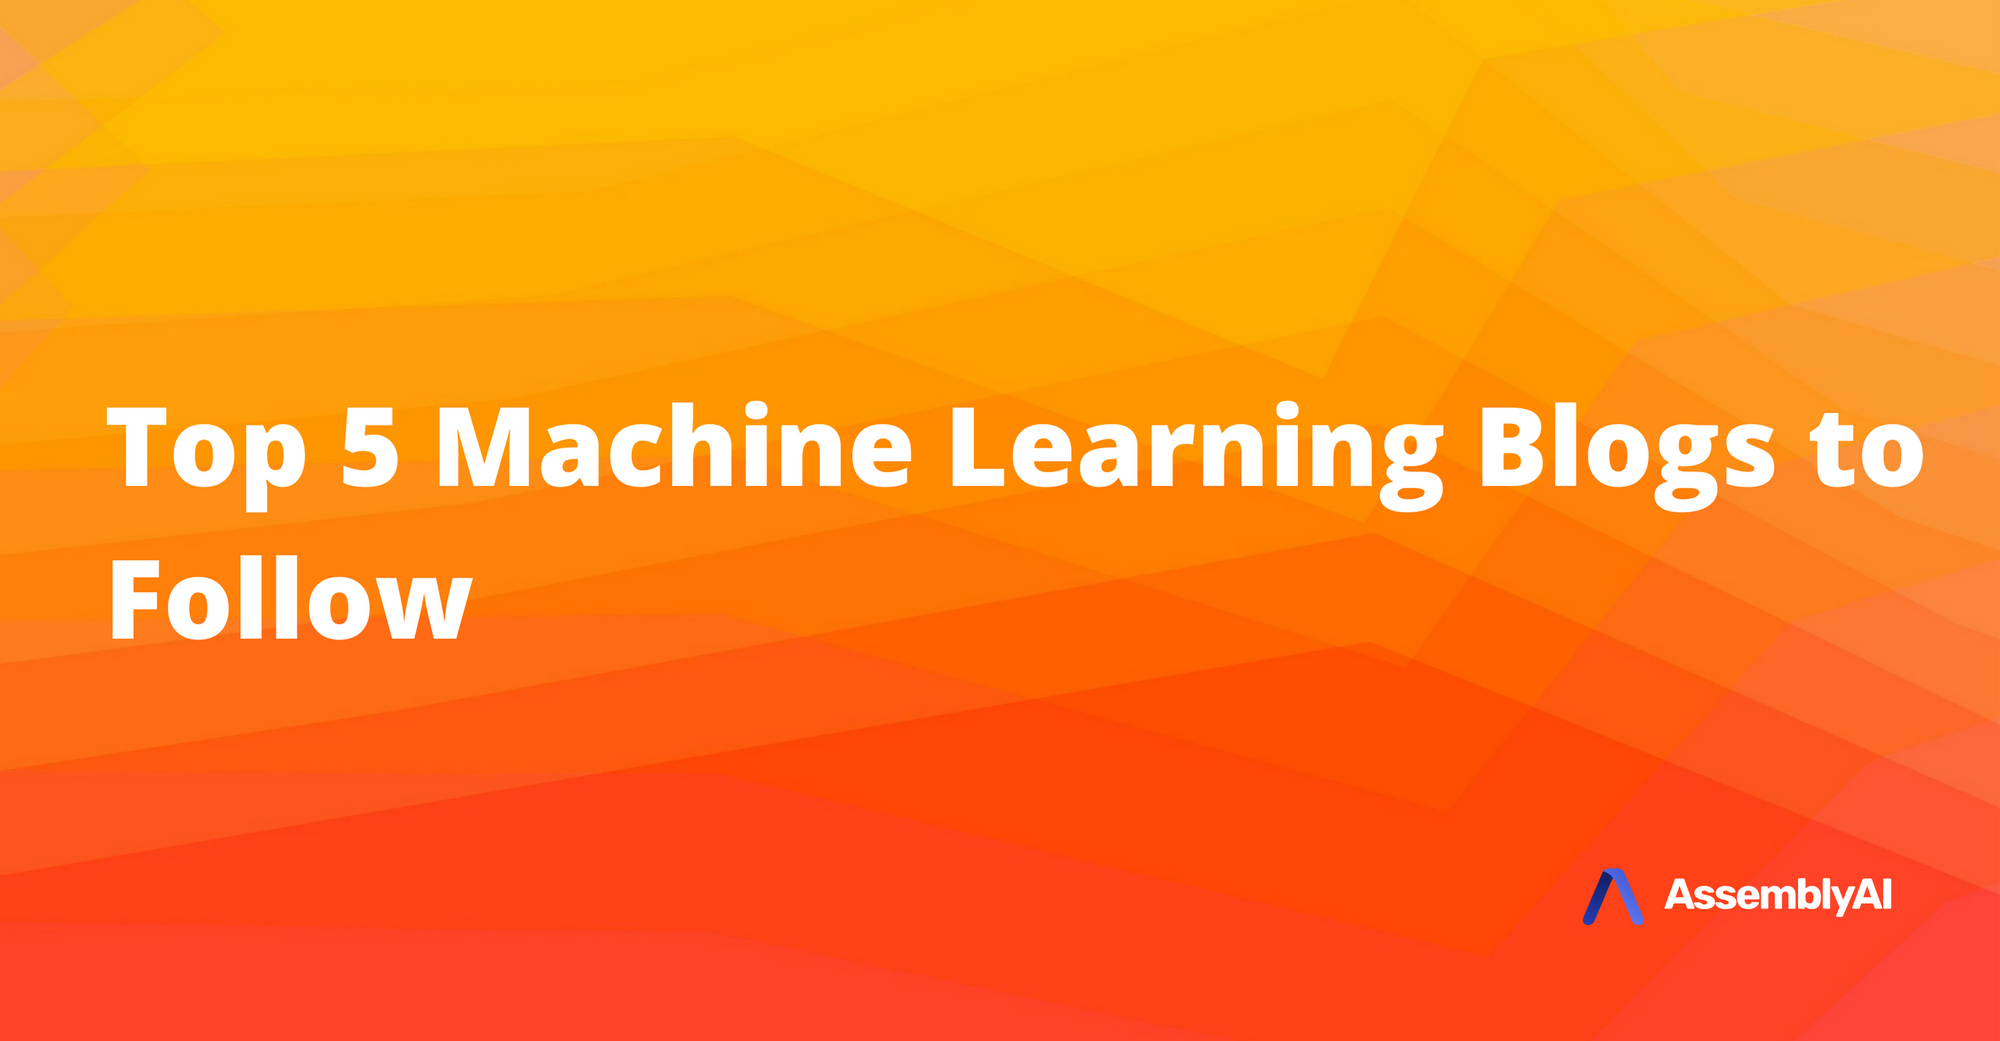 Top 5 Machine Learning Blogs to Follow